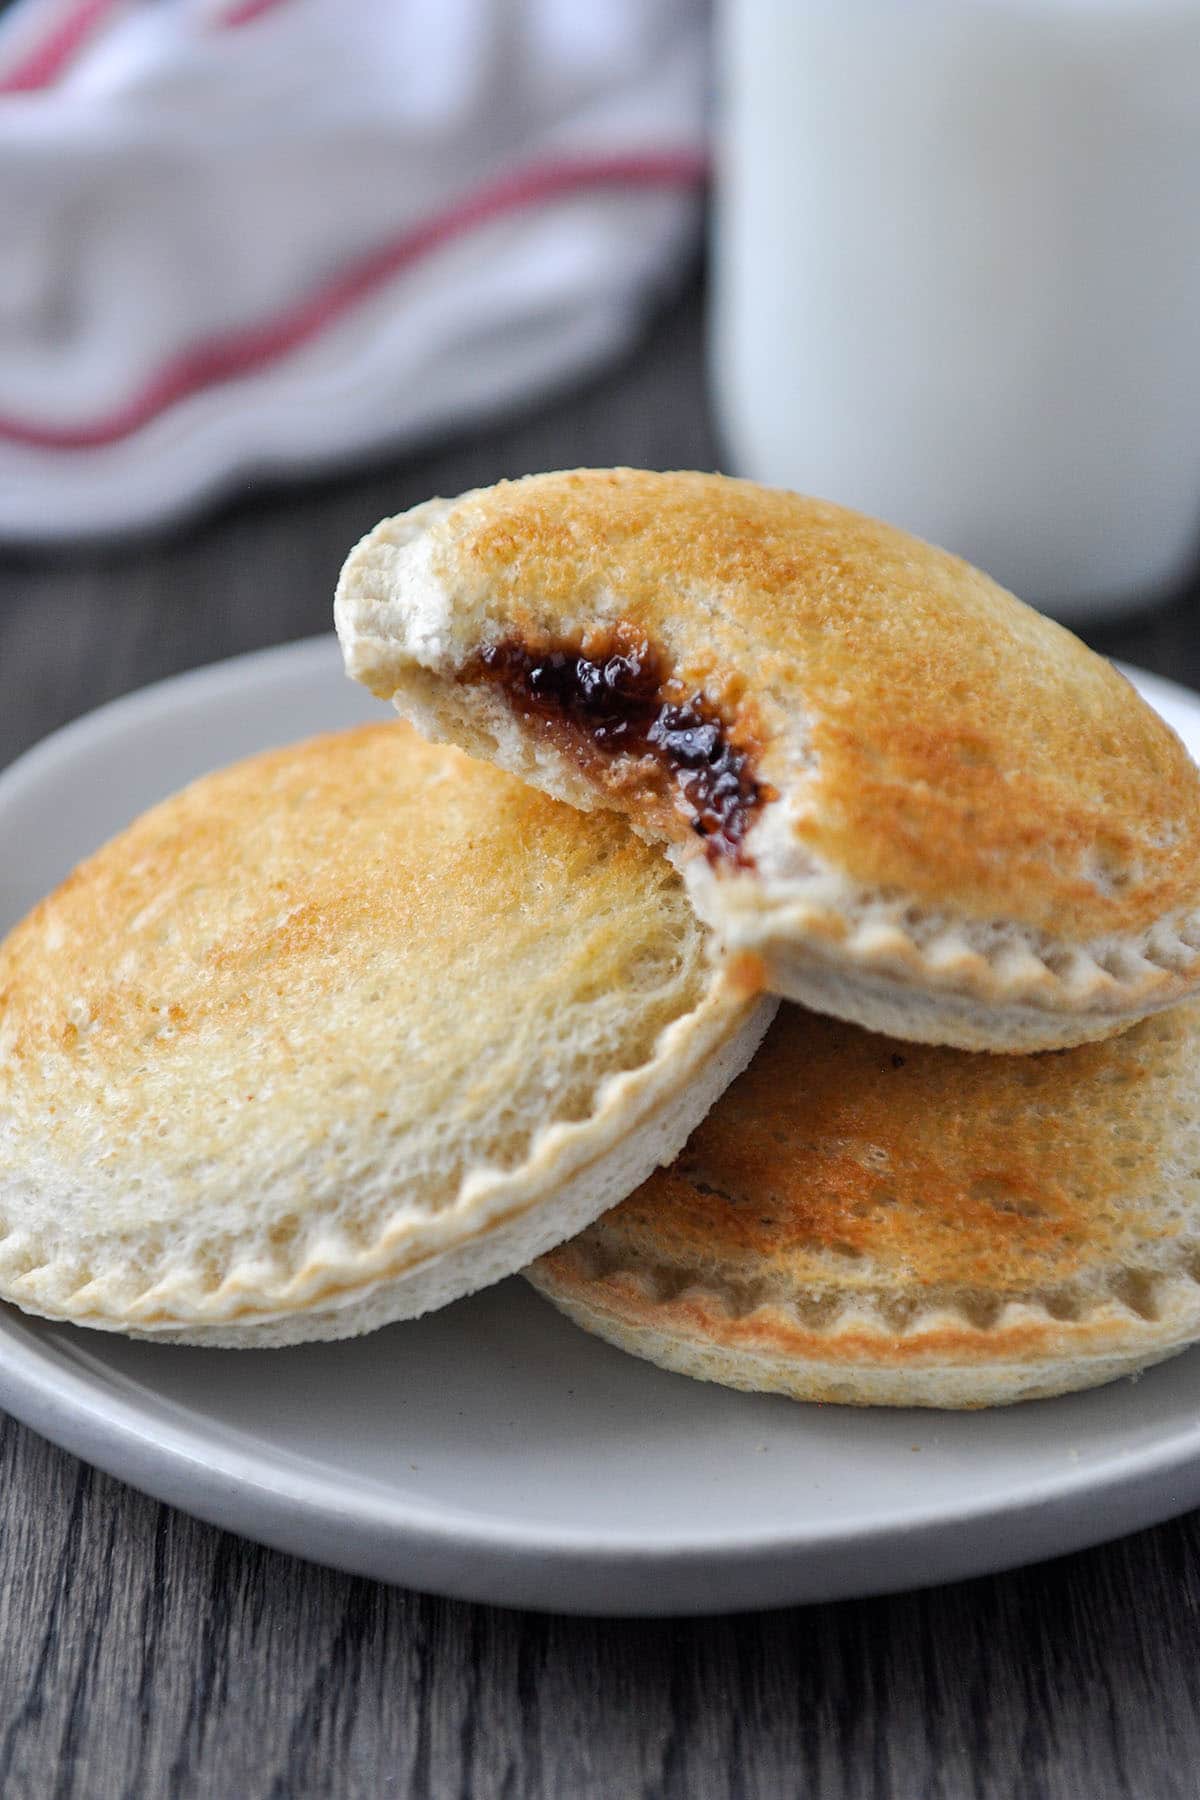 A plate of three cooked Uncrustables sandwiches, one is missing a bite so you can see the peanut butter and jelly inside.